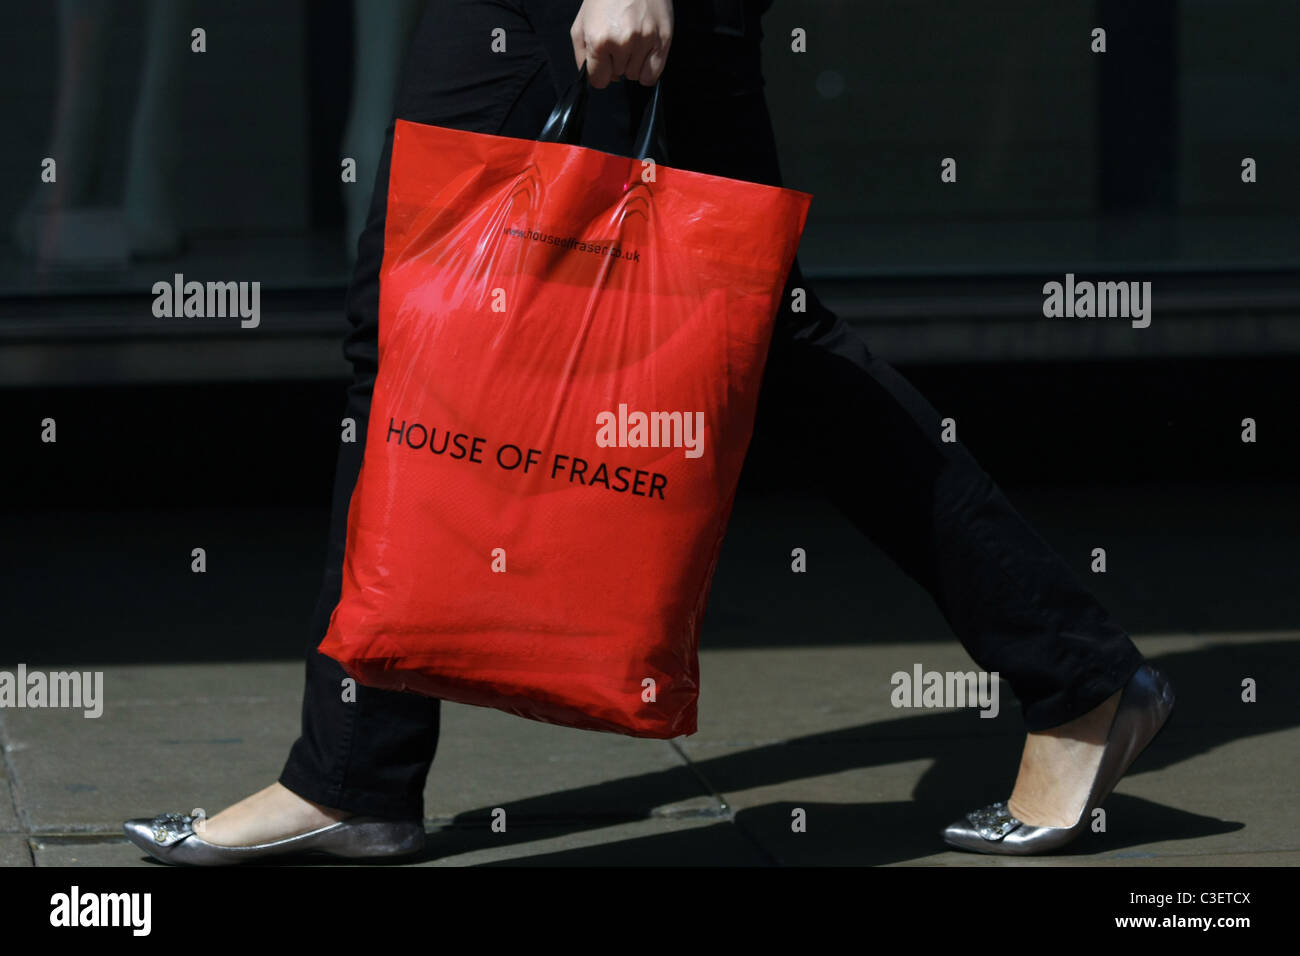 Shopping bags being carried by a female in Oxford Street, London, England Stock Photo